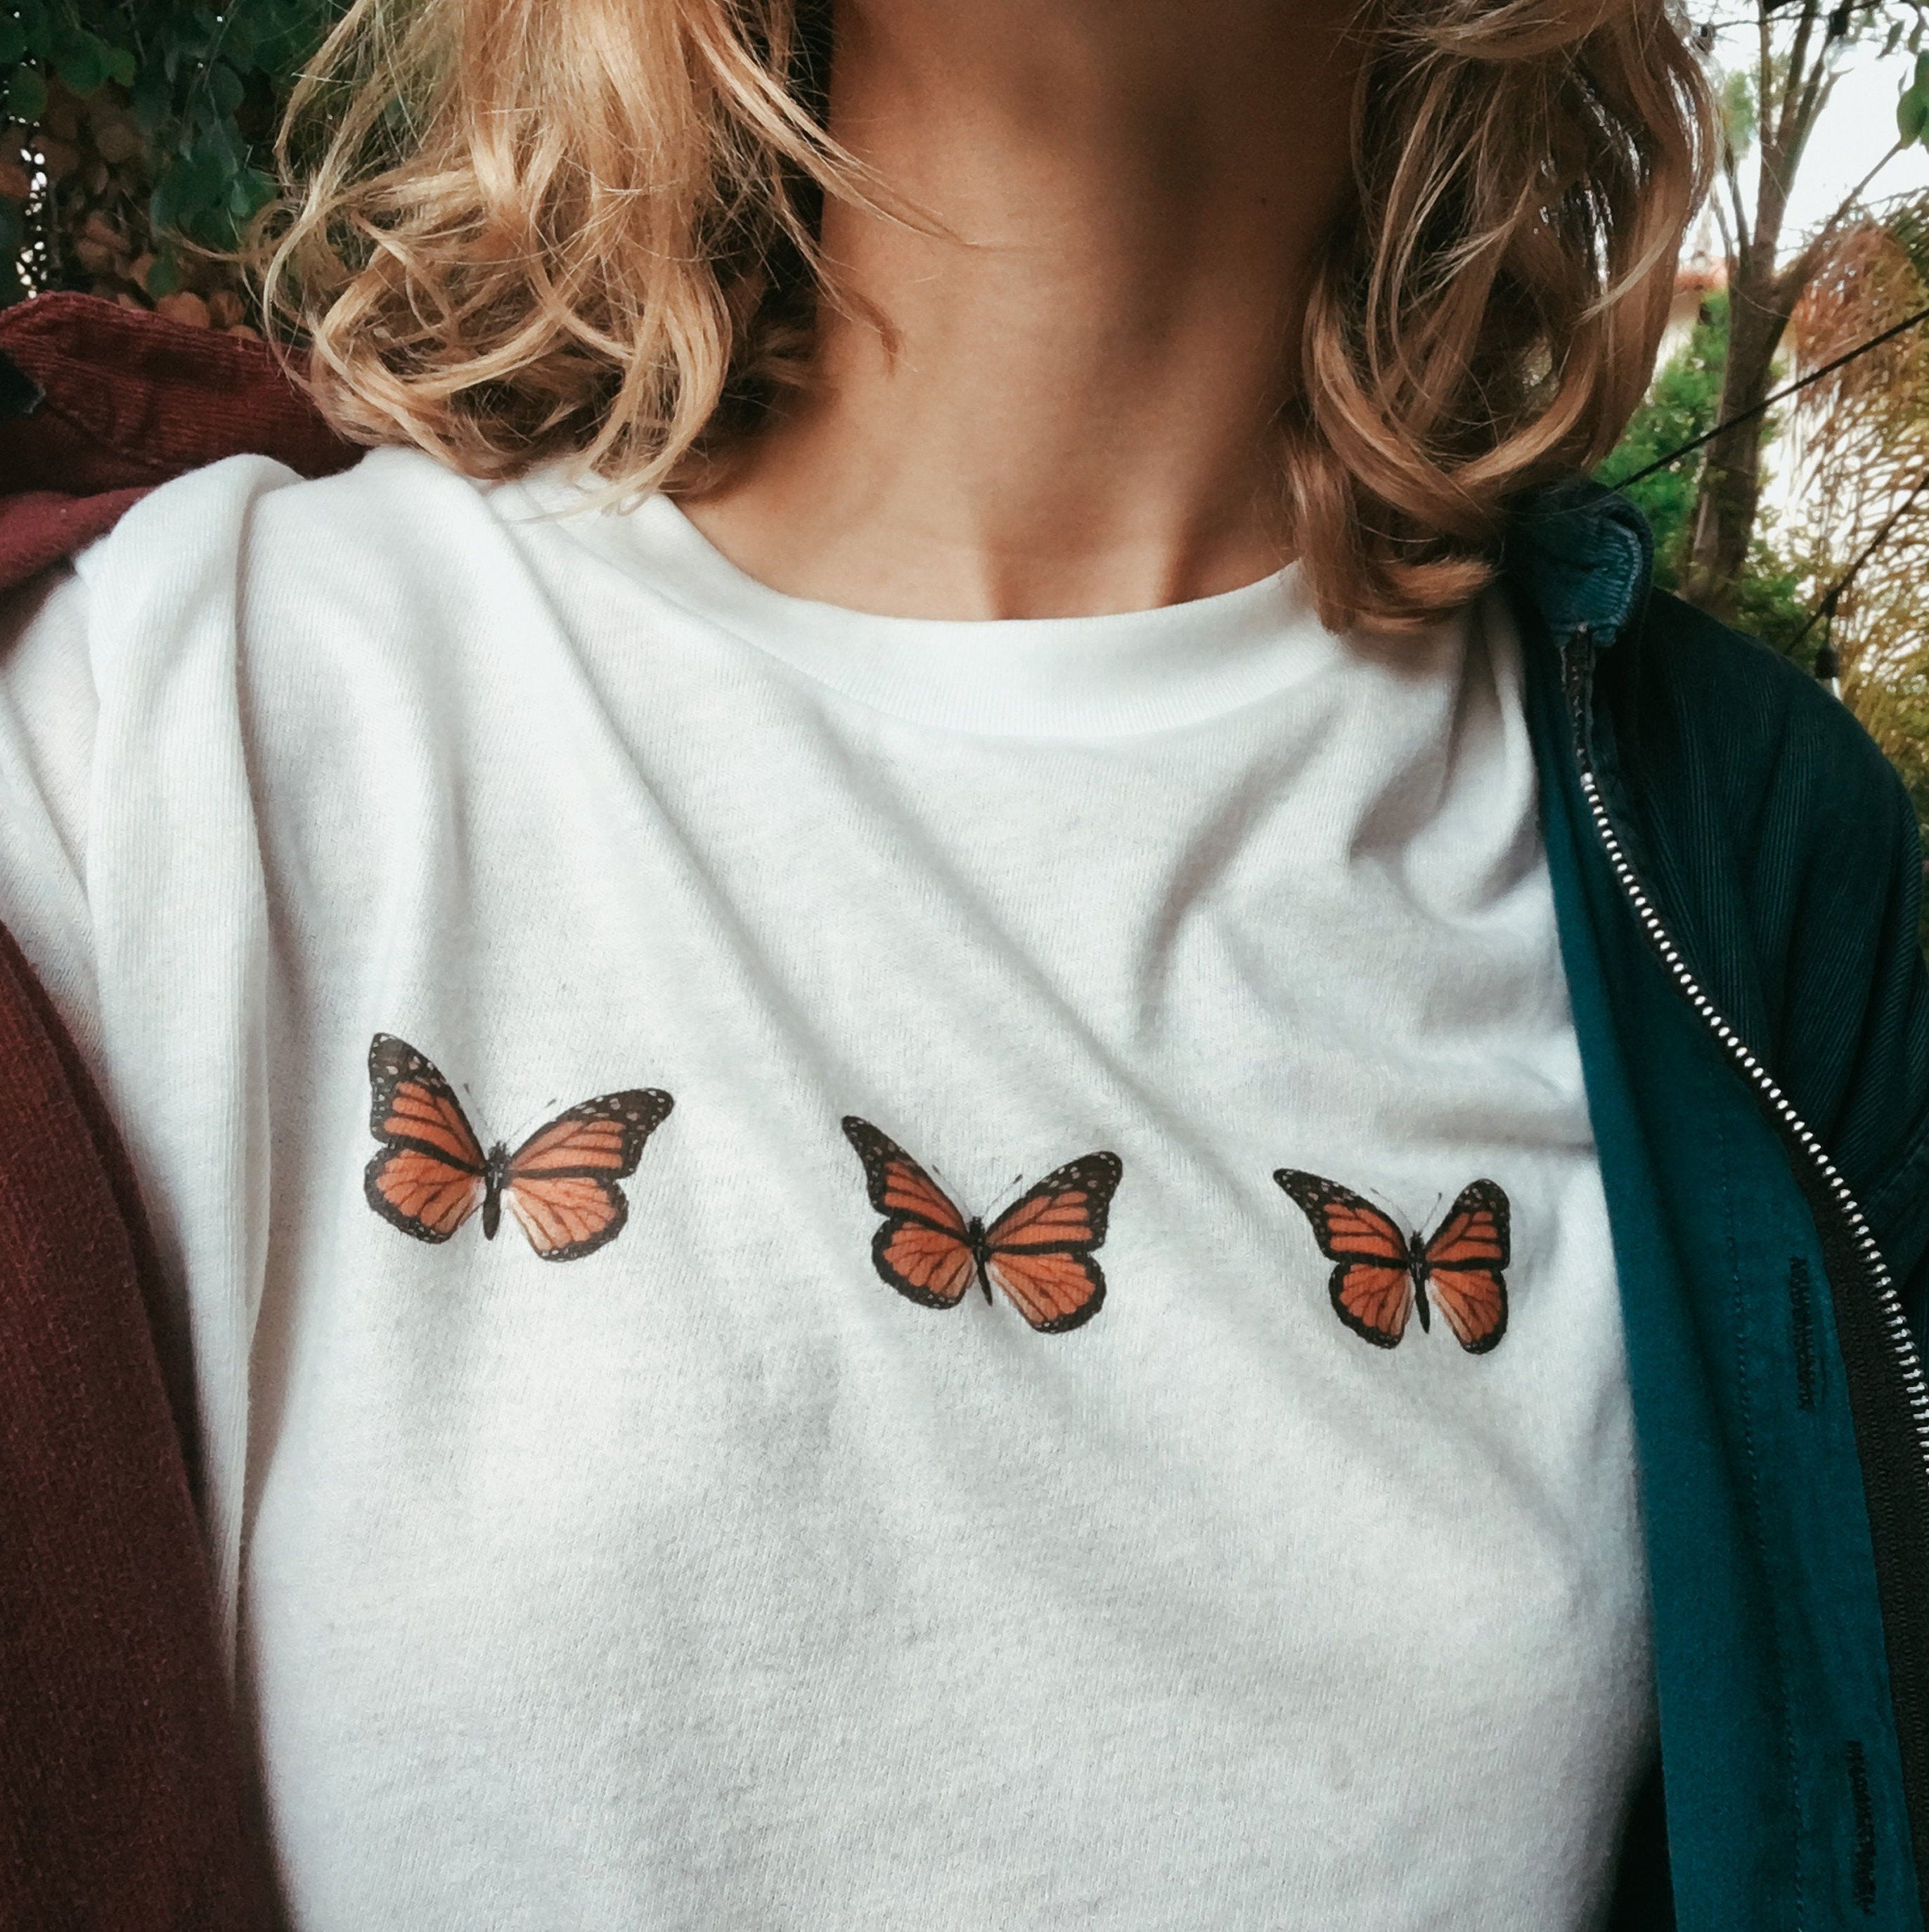 Monarch Butterfly Trio Graphic Tee | aesthetic clothing, aesthetic shirt, boho clothing, botanical shirt, vintage botanical illustration - Monarch Butterfly Trio Graphic Tee | aesthetic clothing, aesthetic shirt, boho clothing, botanical shirt, vintage botanical illustration -   11 fitness Aesthetic vintage ideas